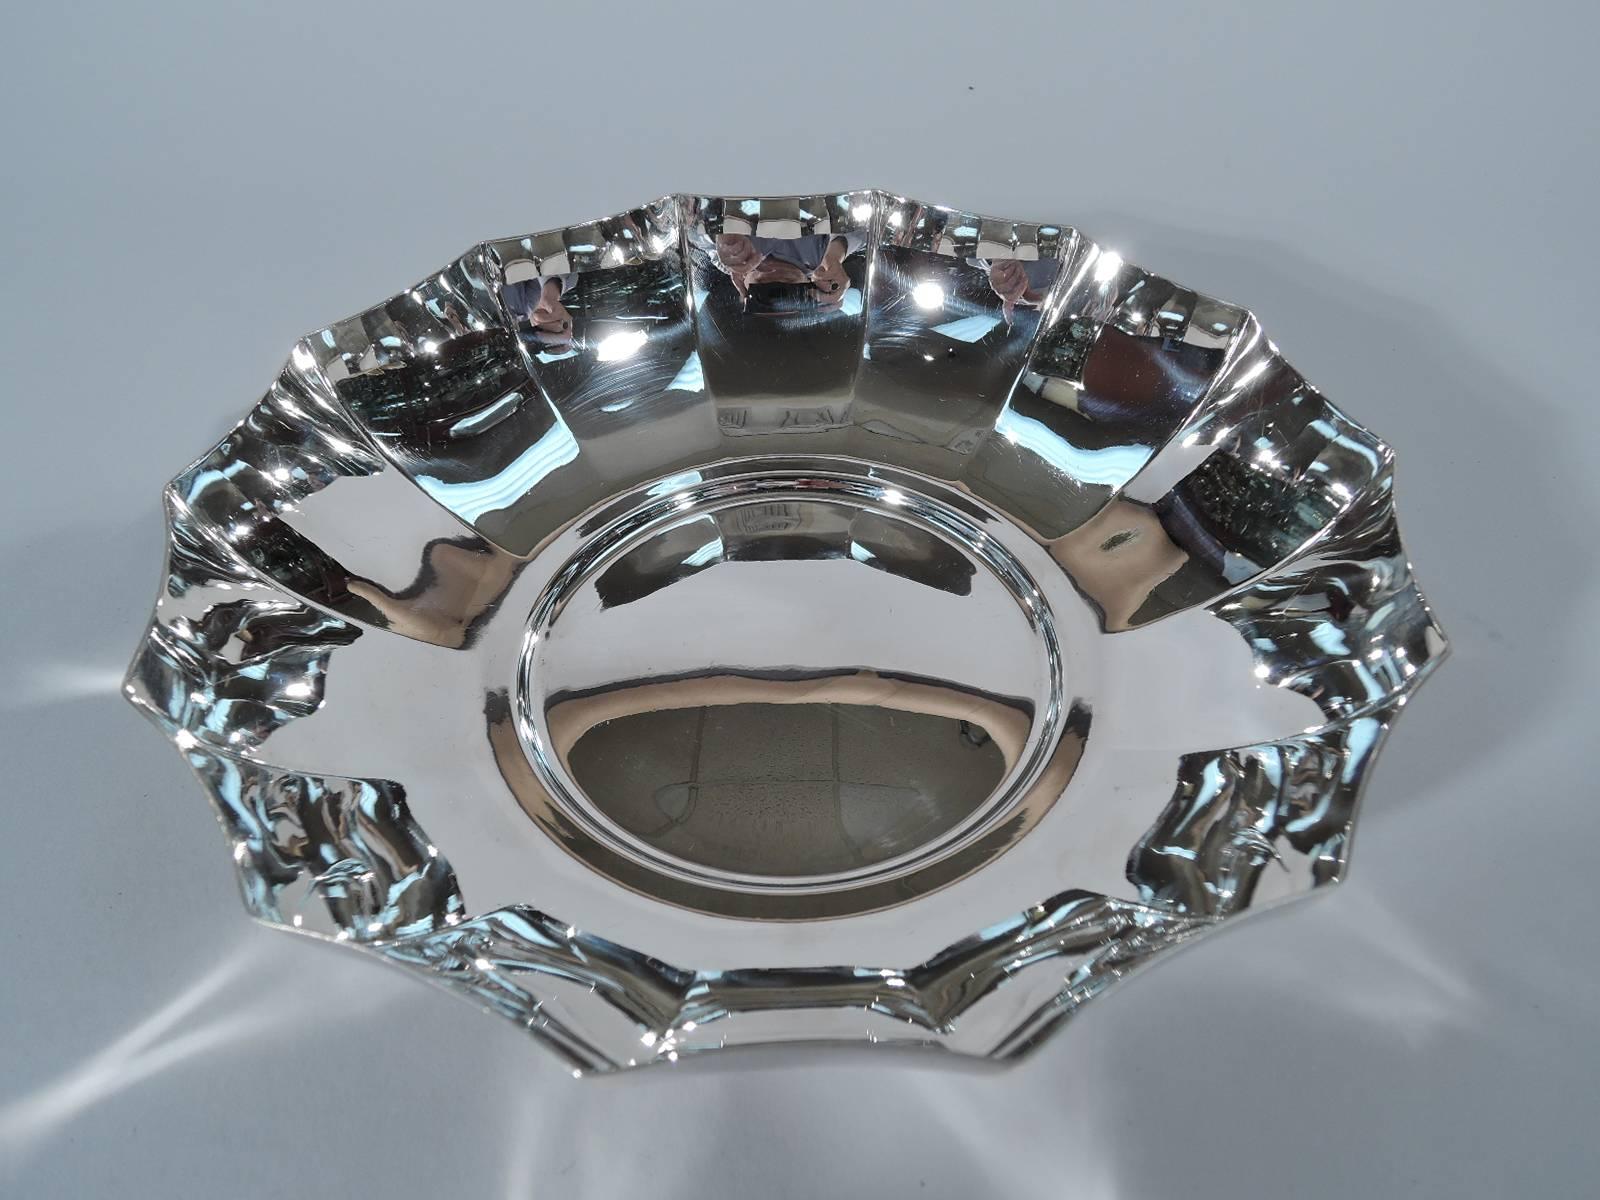 Sterling silver bowl. Made by Tiffany & Co. in New York. Curved and faceted sides and circular well. A fine Midcentury design. Hallmark includes postwar pattern no. 23570. Very good condition.

Dimensions: H 1 7/8 x W7 3/8 x D 7 in. Weight: 9.3